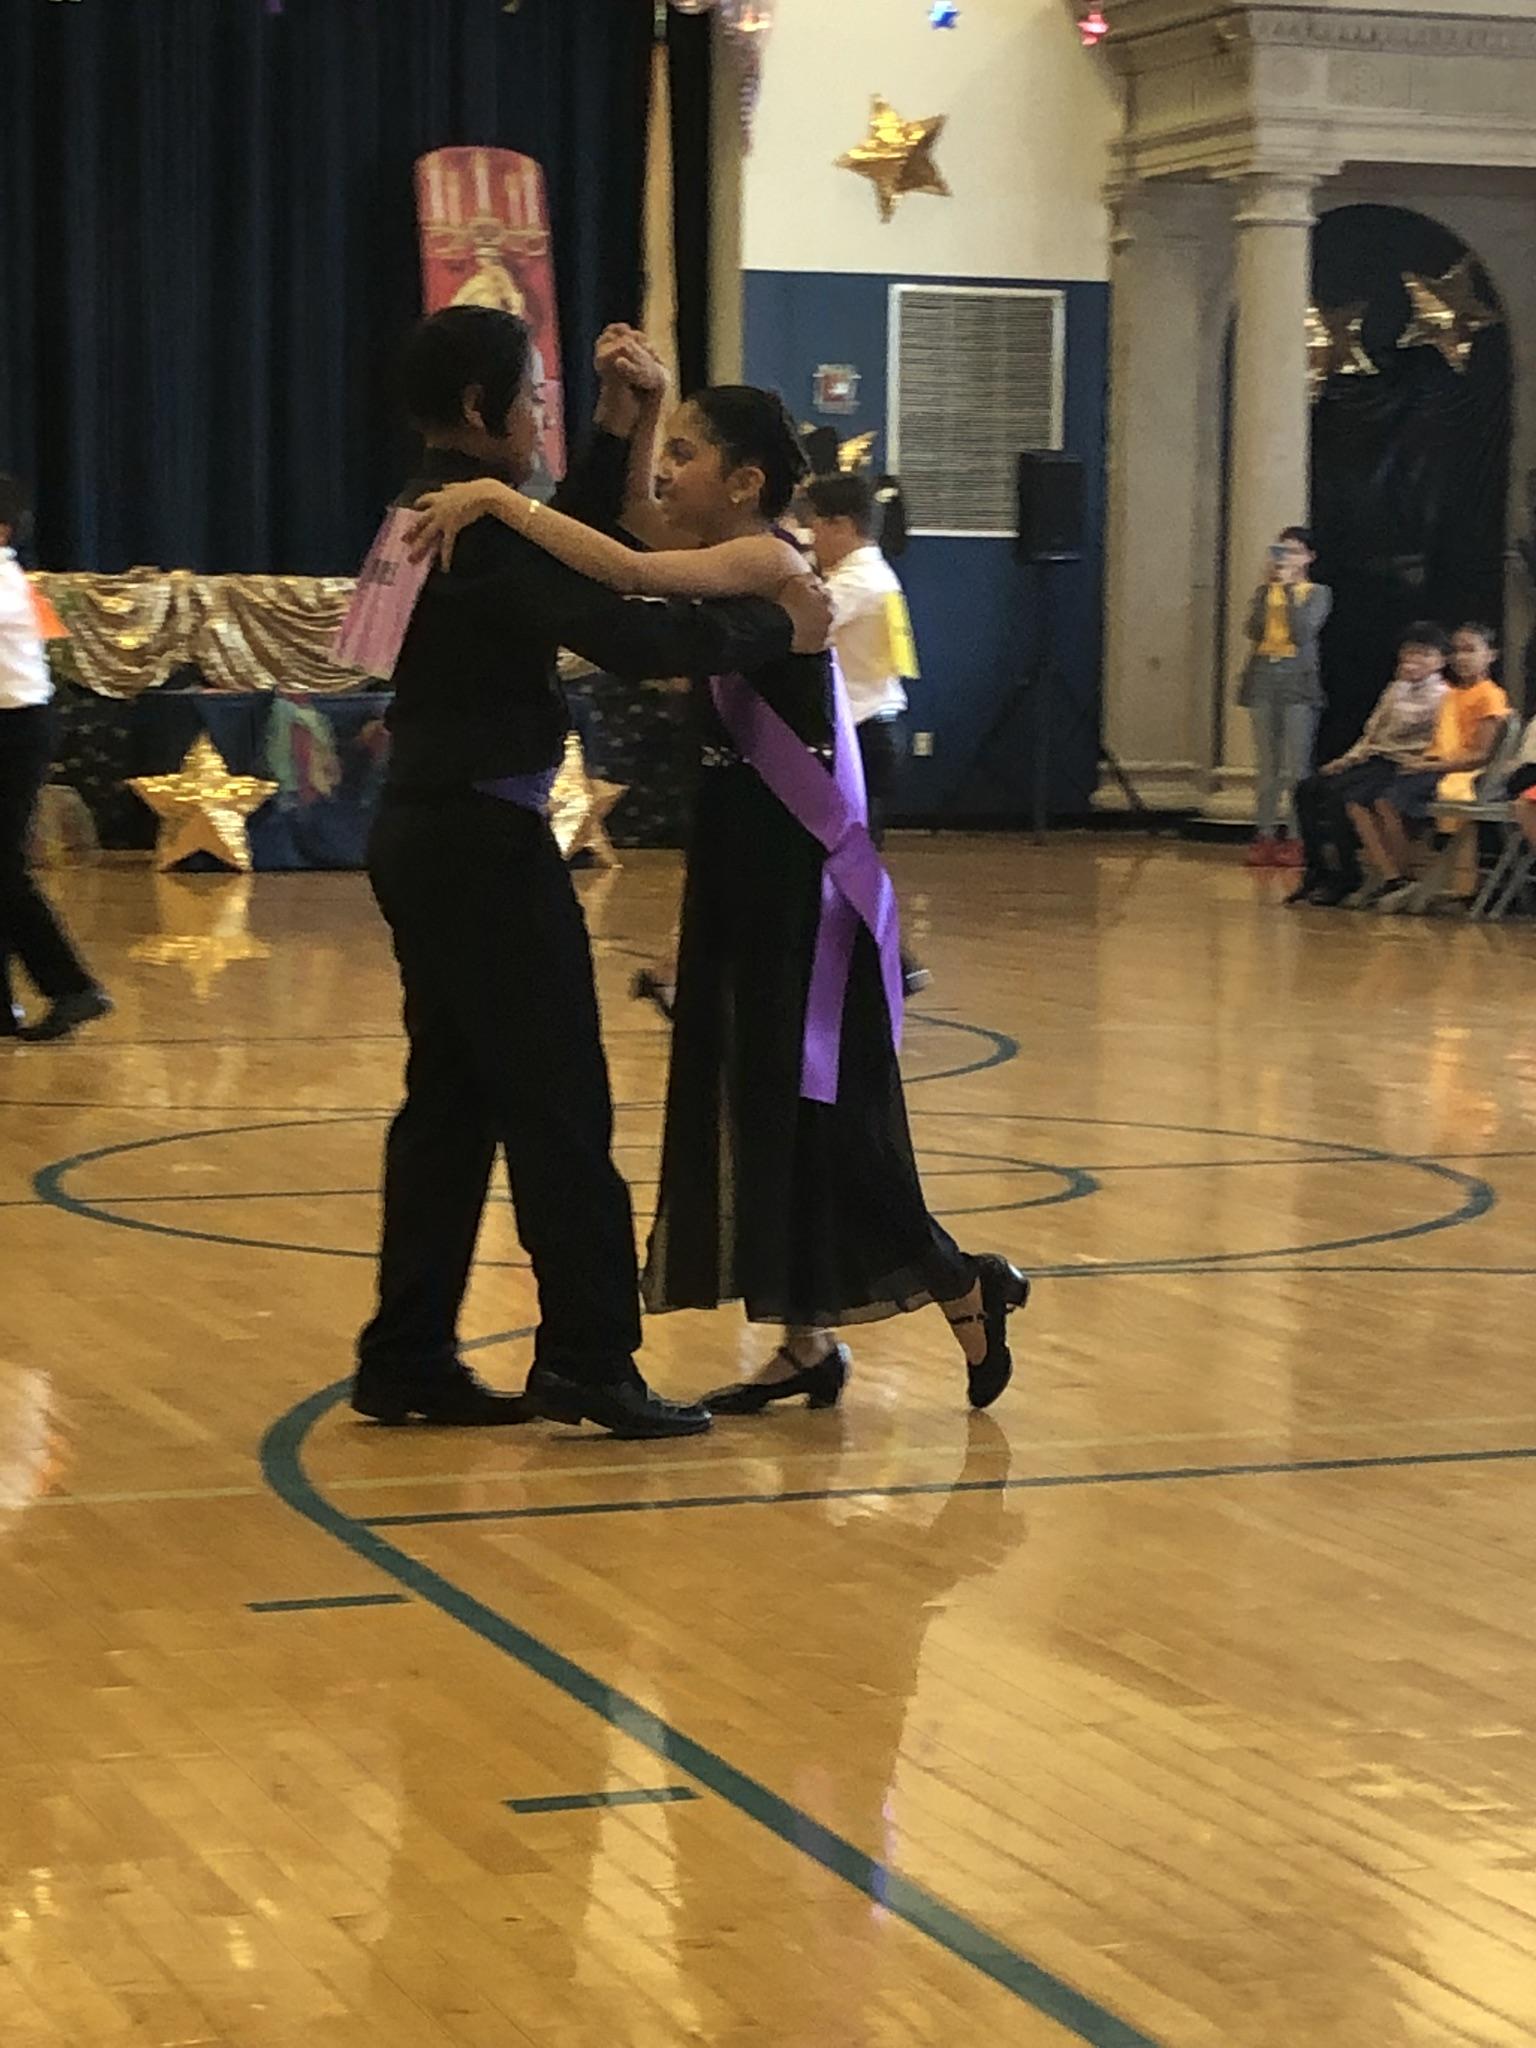 one couple dancing at the semi final competition